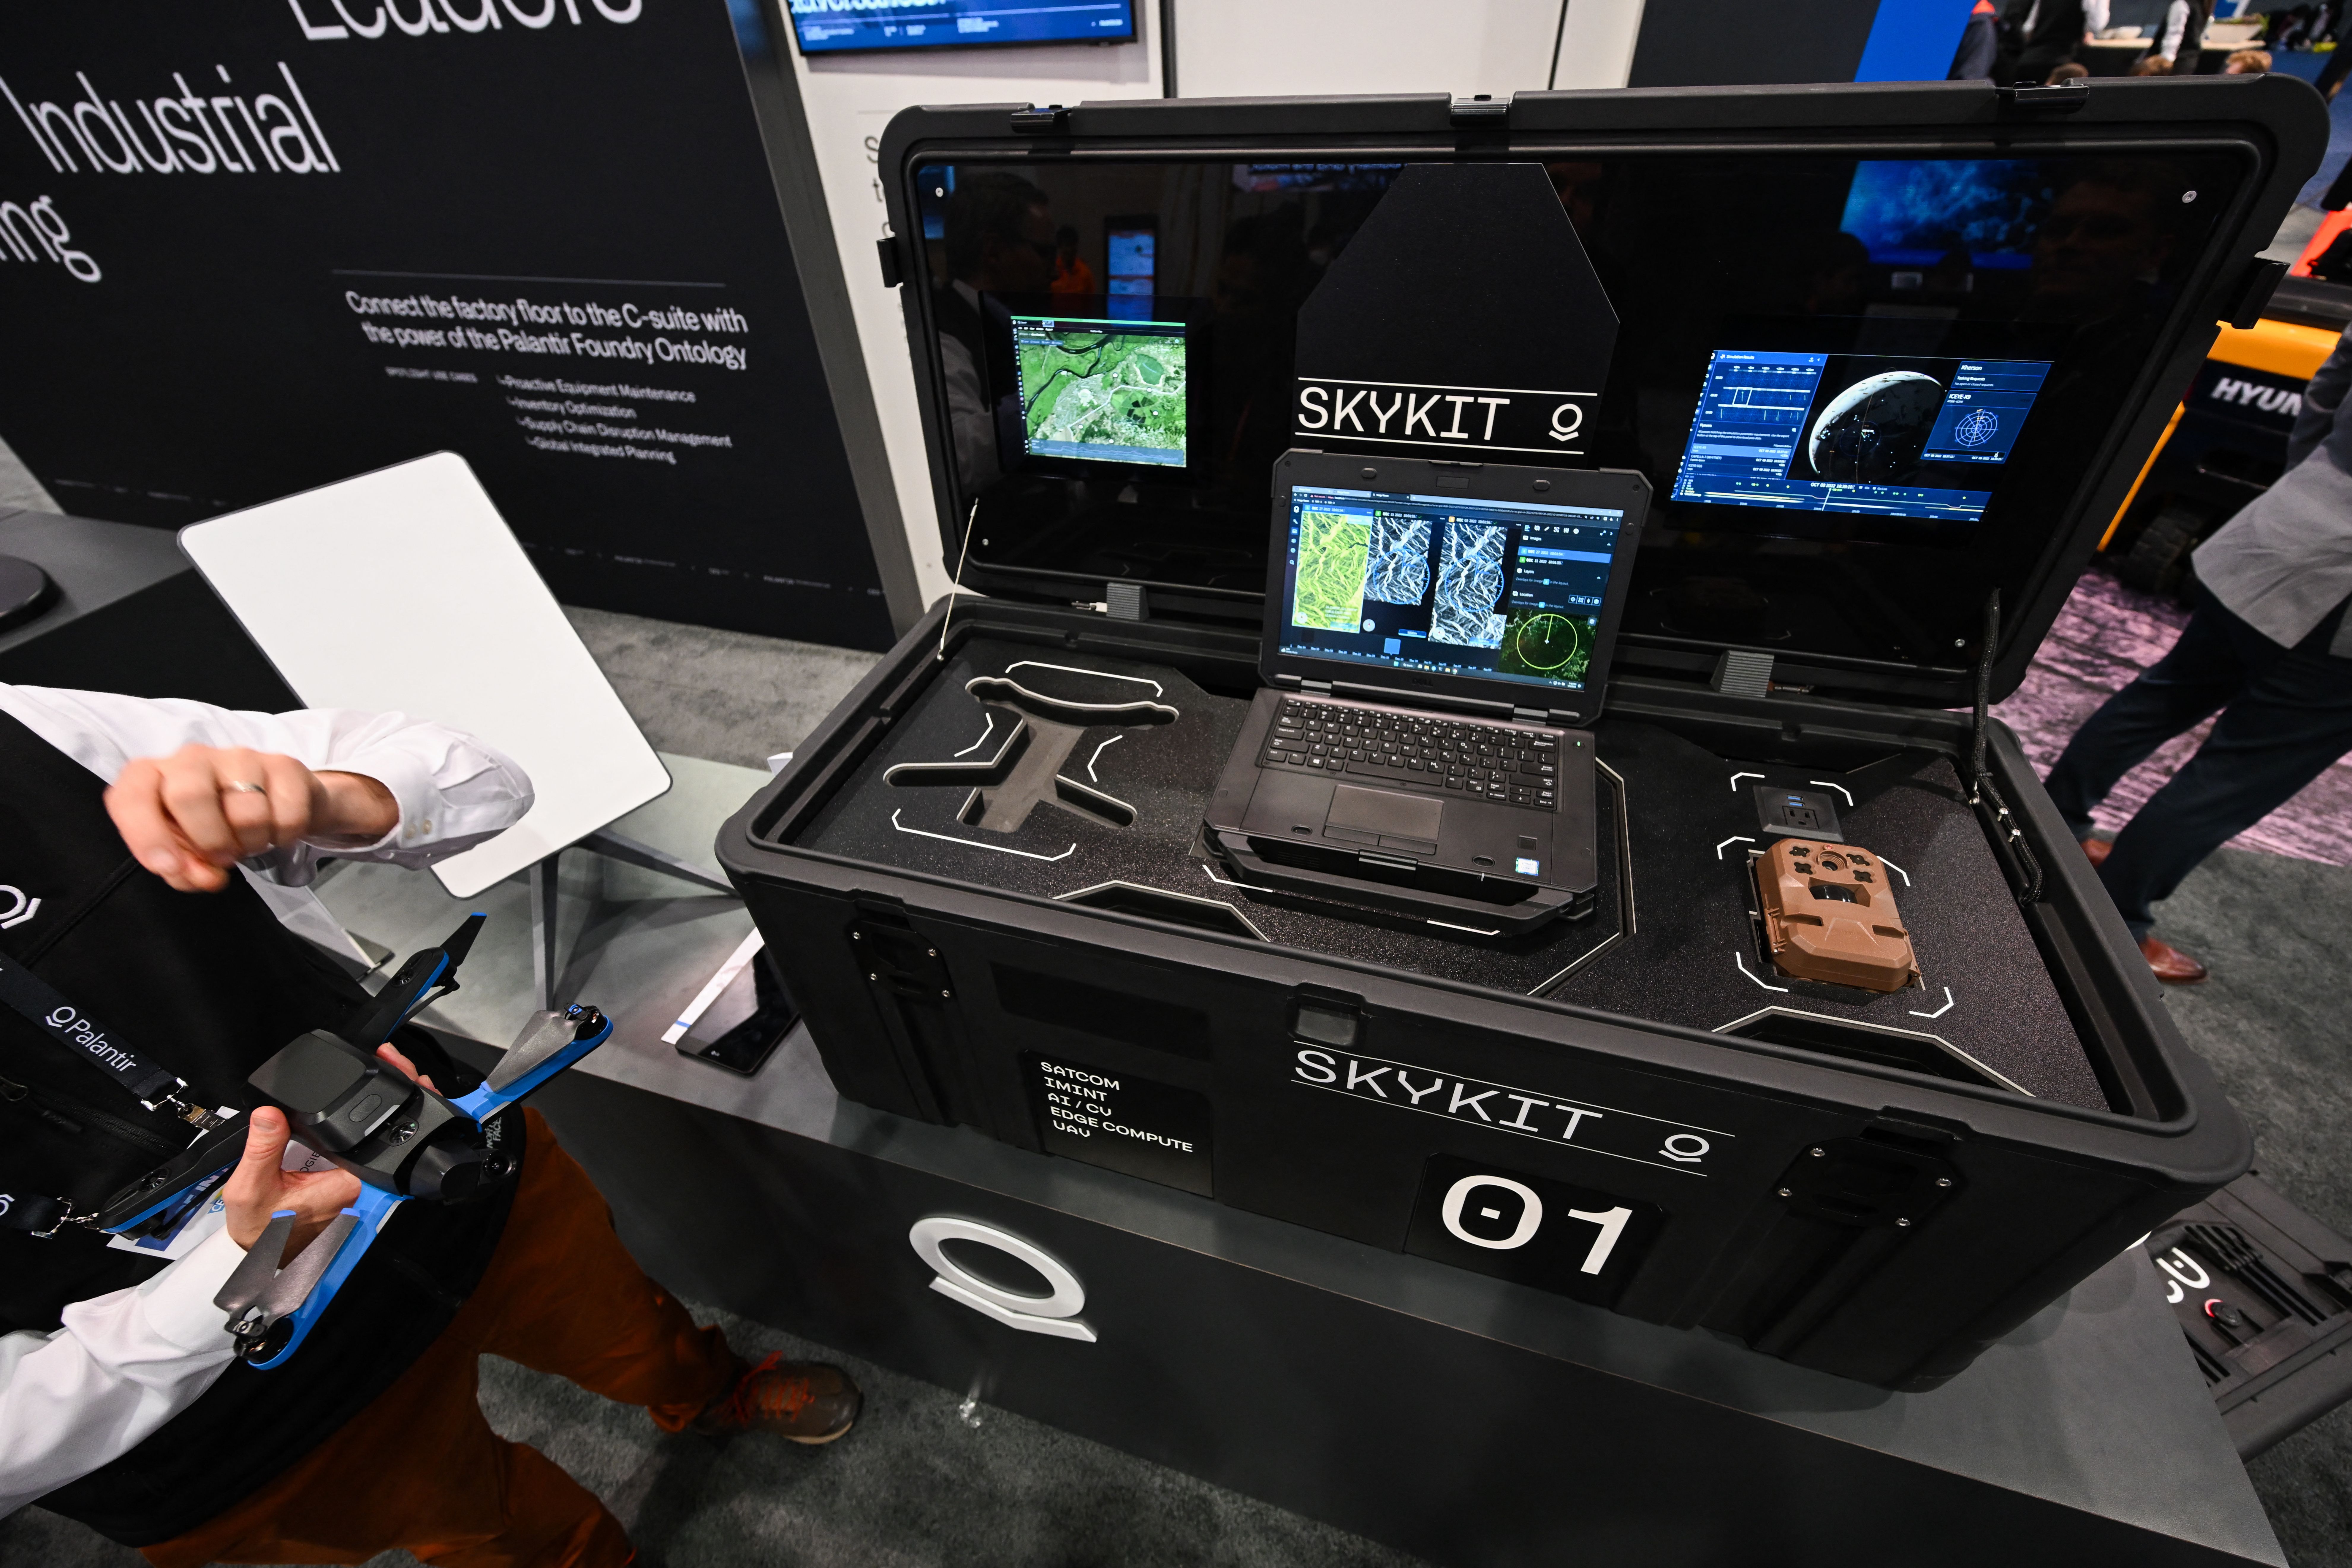 A Palantir Technologies Skykit, is displayed at the companys booth during the Consumer Electronics Show (CES) in Las Vegas, Nevada on January 5, 2023. - The Skykit incorporates the companys software along with a UAV drone, trail camera, battery packs, and a SpaceX Starlink terminal into a self-contained defense intelligence package deployable to hostile environments. 